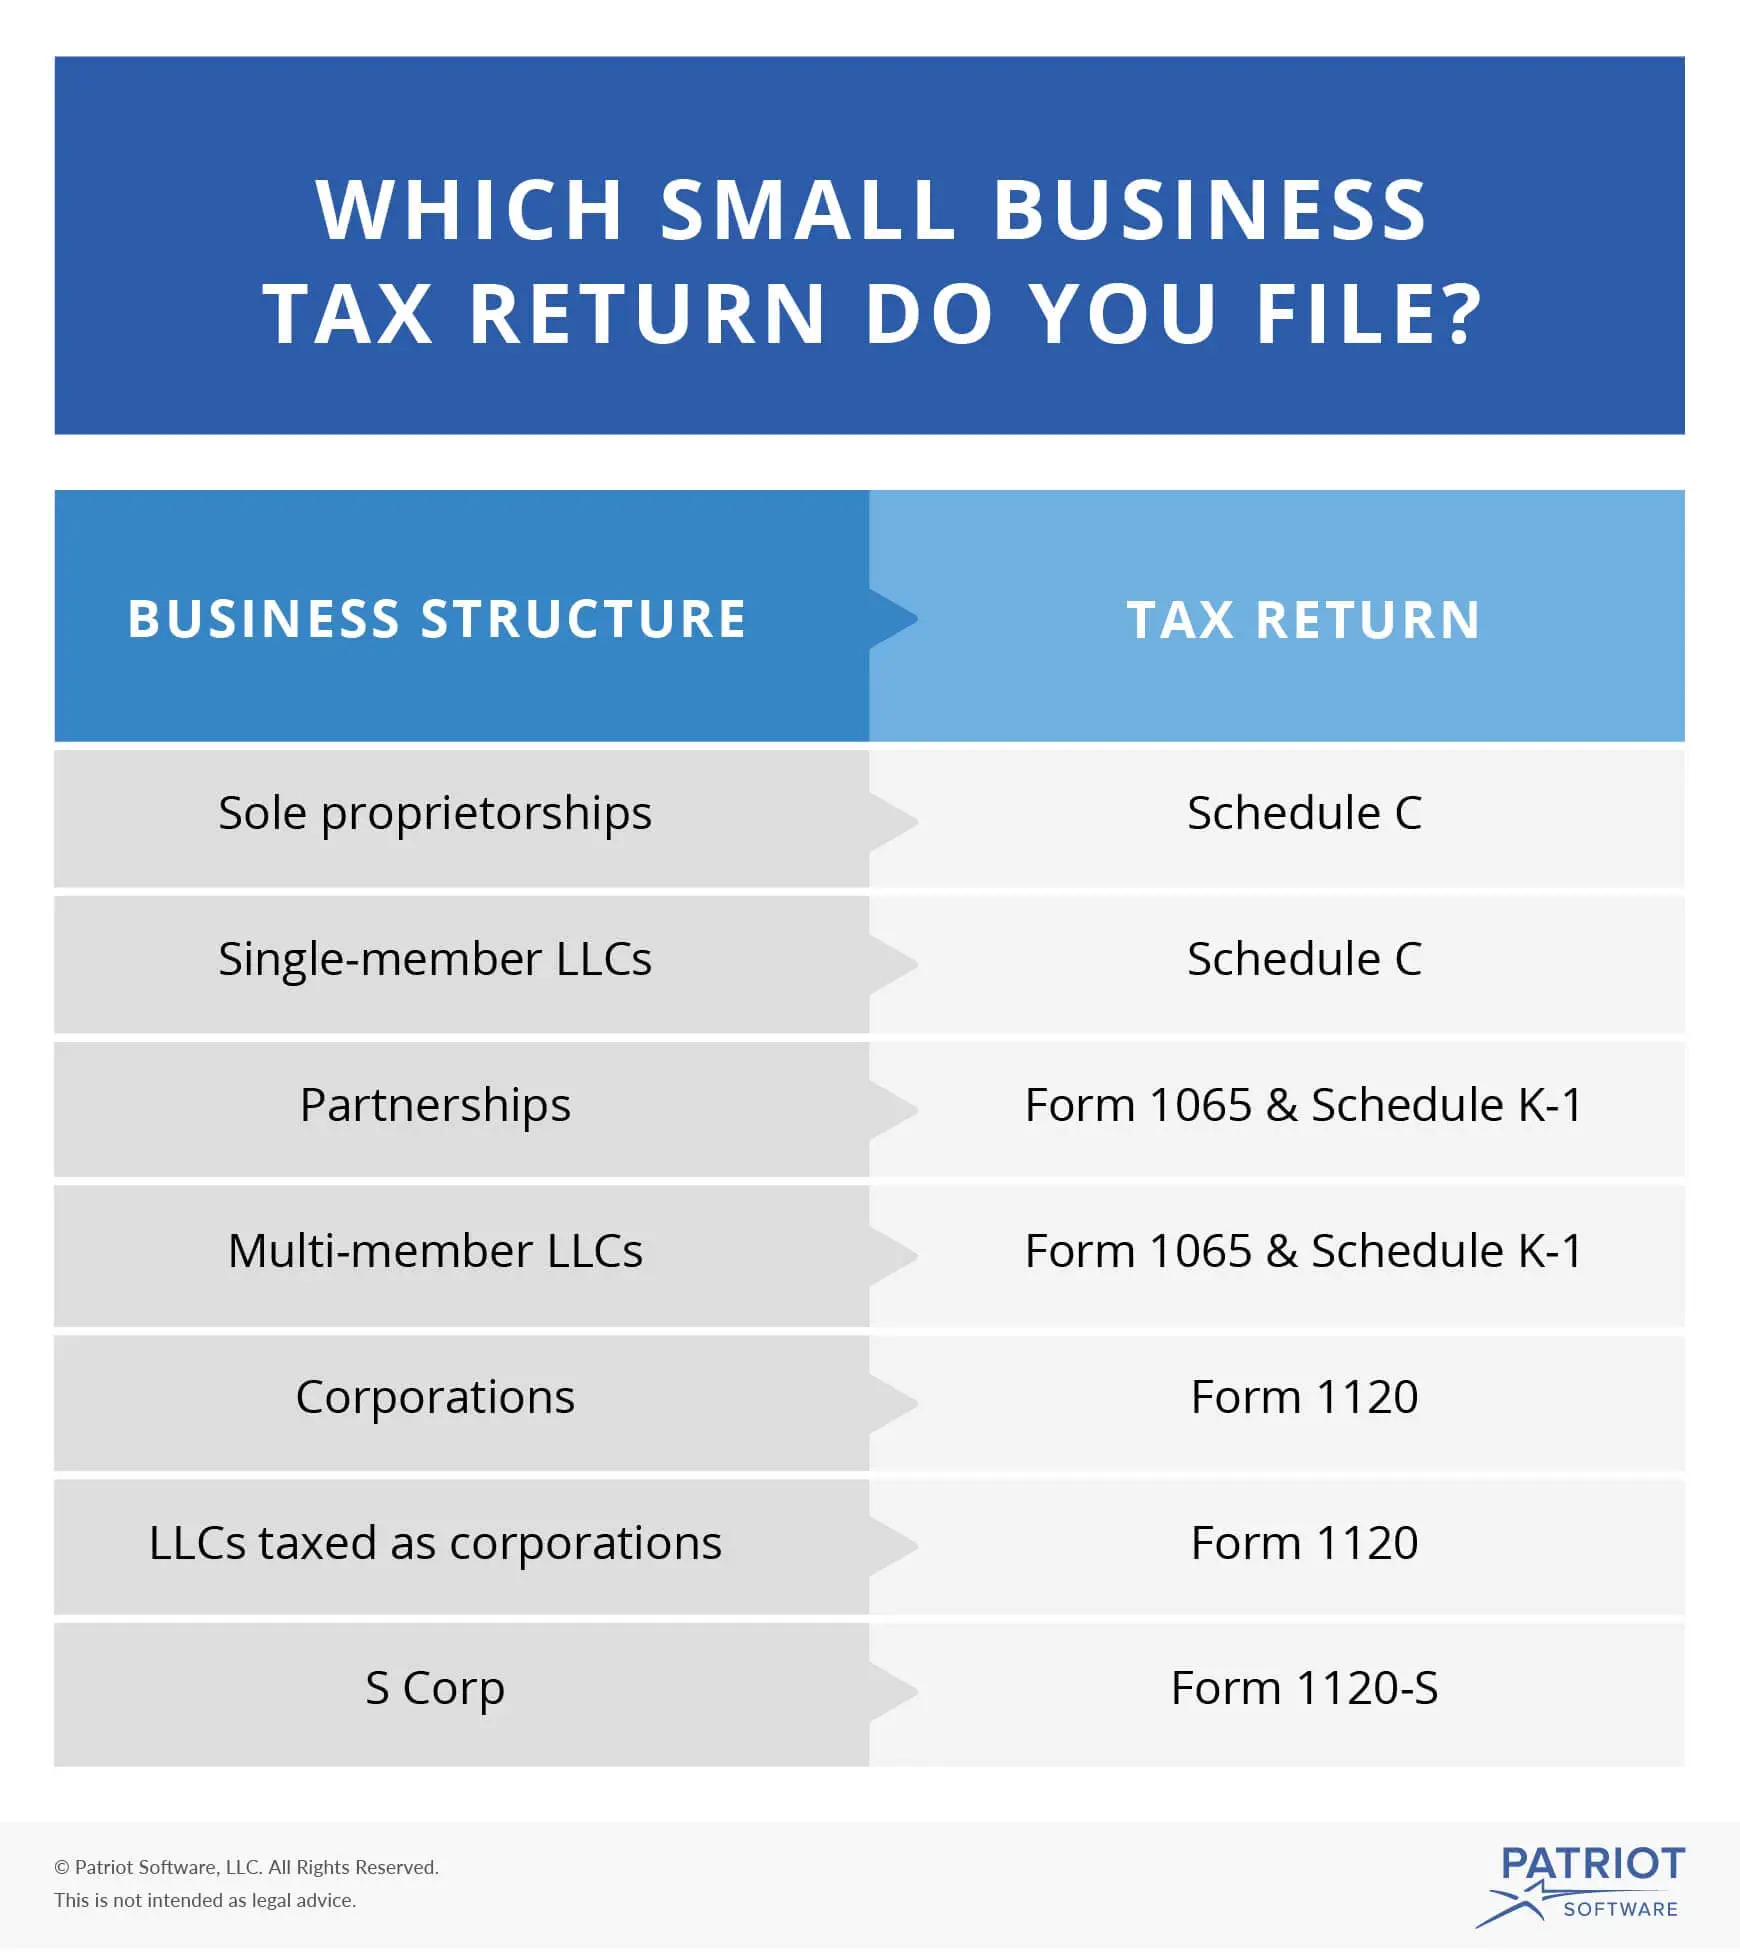 How to File a Small Business Tax Return